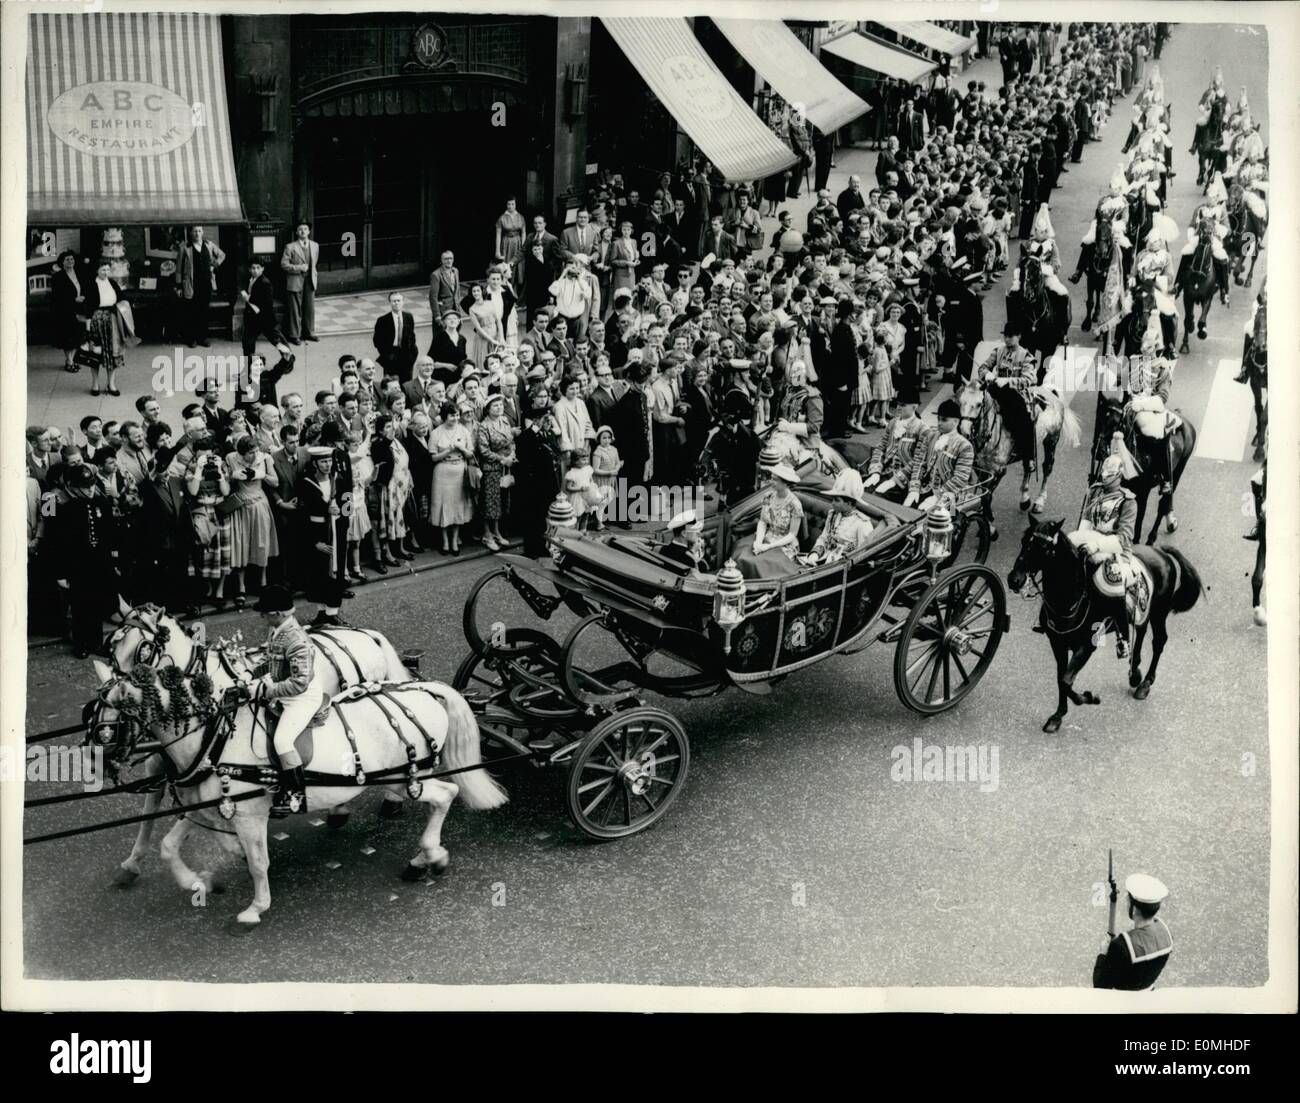 Jul. 07, 1955 - King Feisal Arrives For State Visit: King Feisal of Iraq arrived at Victoria station this afternoon at the start of his state Visit to Britain He was at the station by H.,M. The Queen, the Duke of Edinburgh and other members of the Royal Family, Photo Shows General view as the procession with King Feisal, H.M.The Queen and the Duke of Edinburgh, in the  Victoria on its way to the Palace with on escort of Househoh Stock Photo